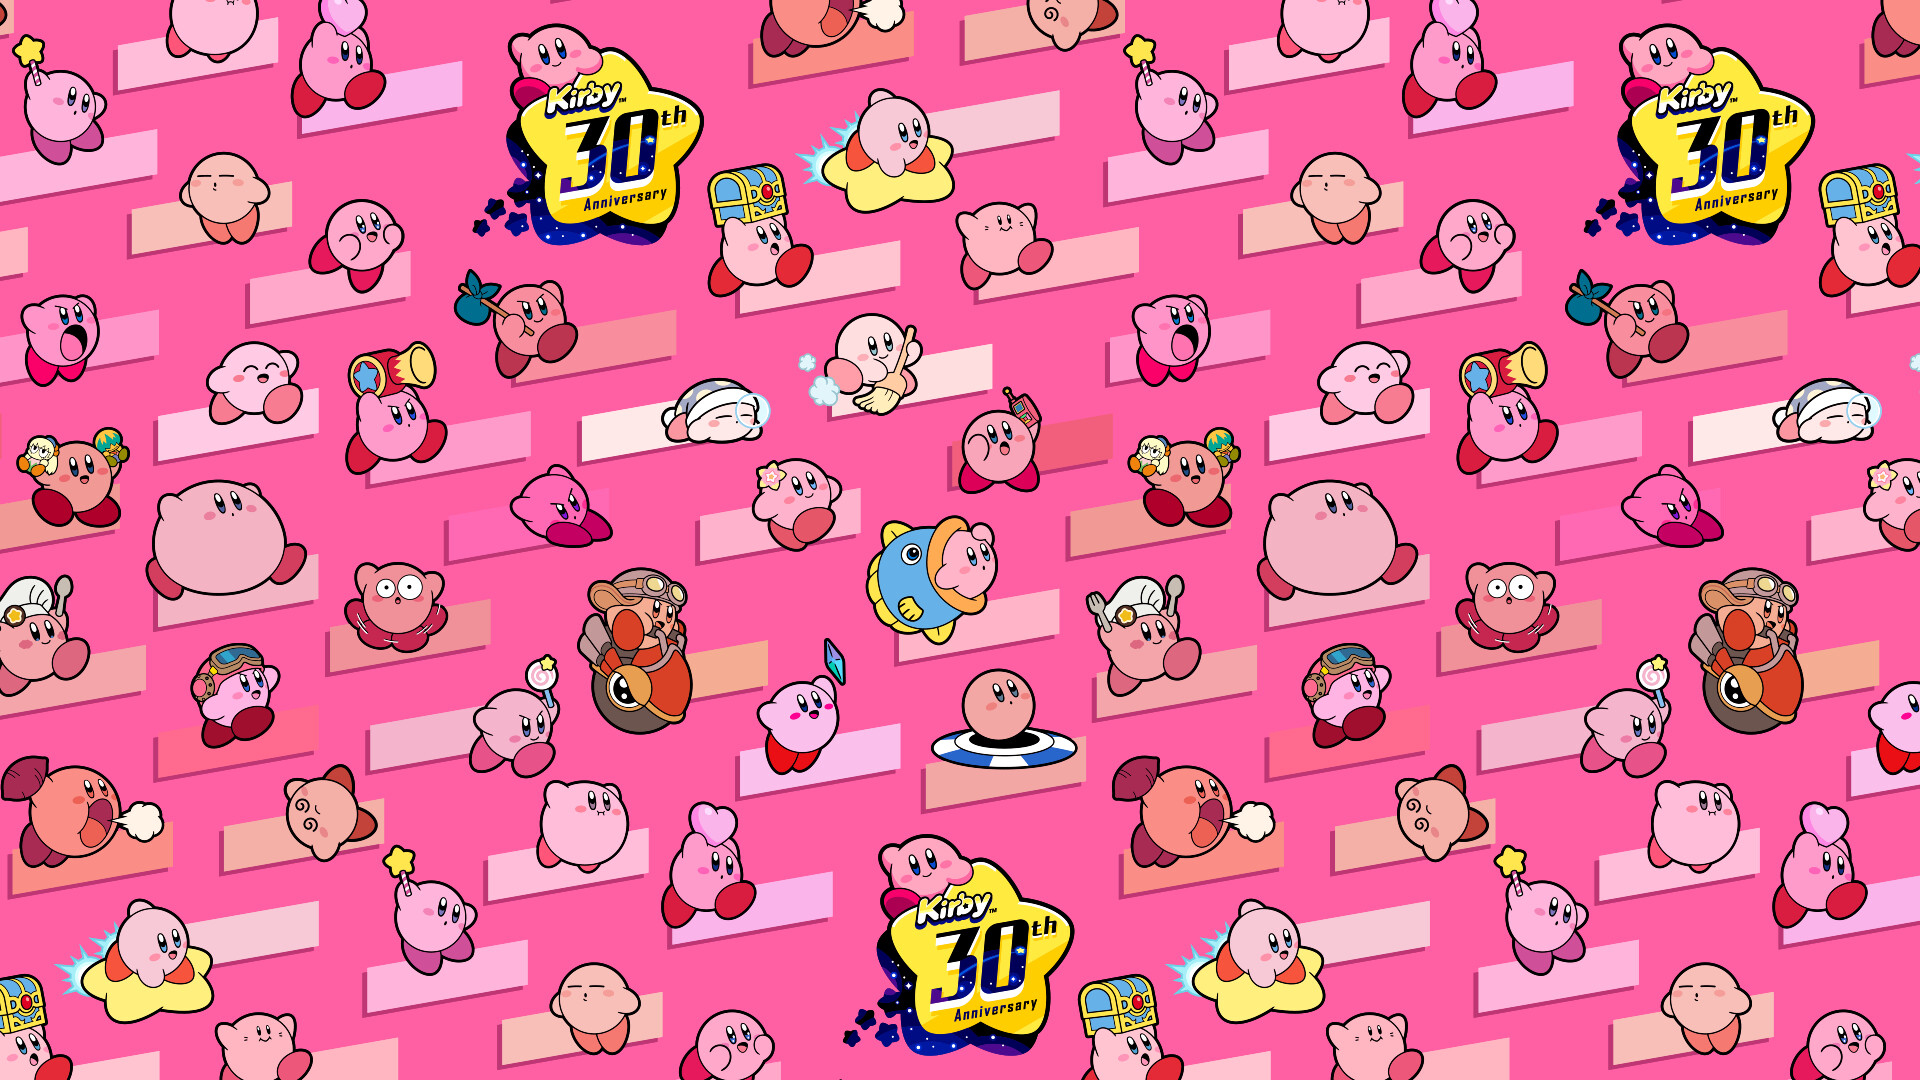 Kirby 30th anniversary, Special promotions, Exclusive deals, Celebrating Kirby's legacy, 1920x1080 Full HD Desktop